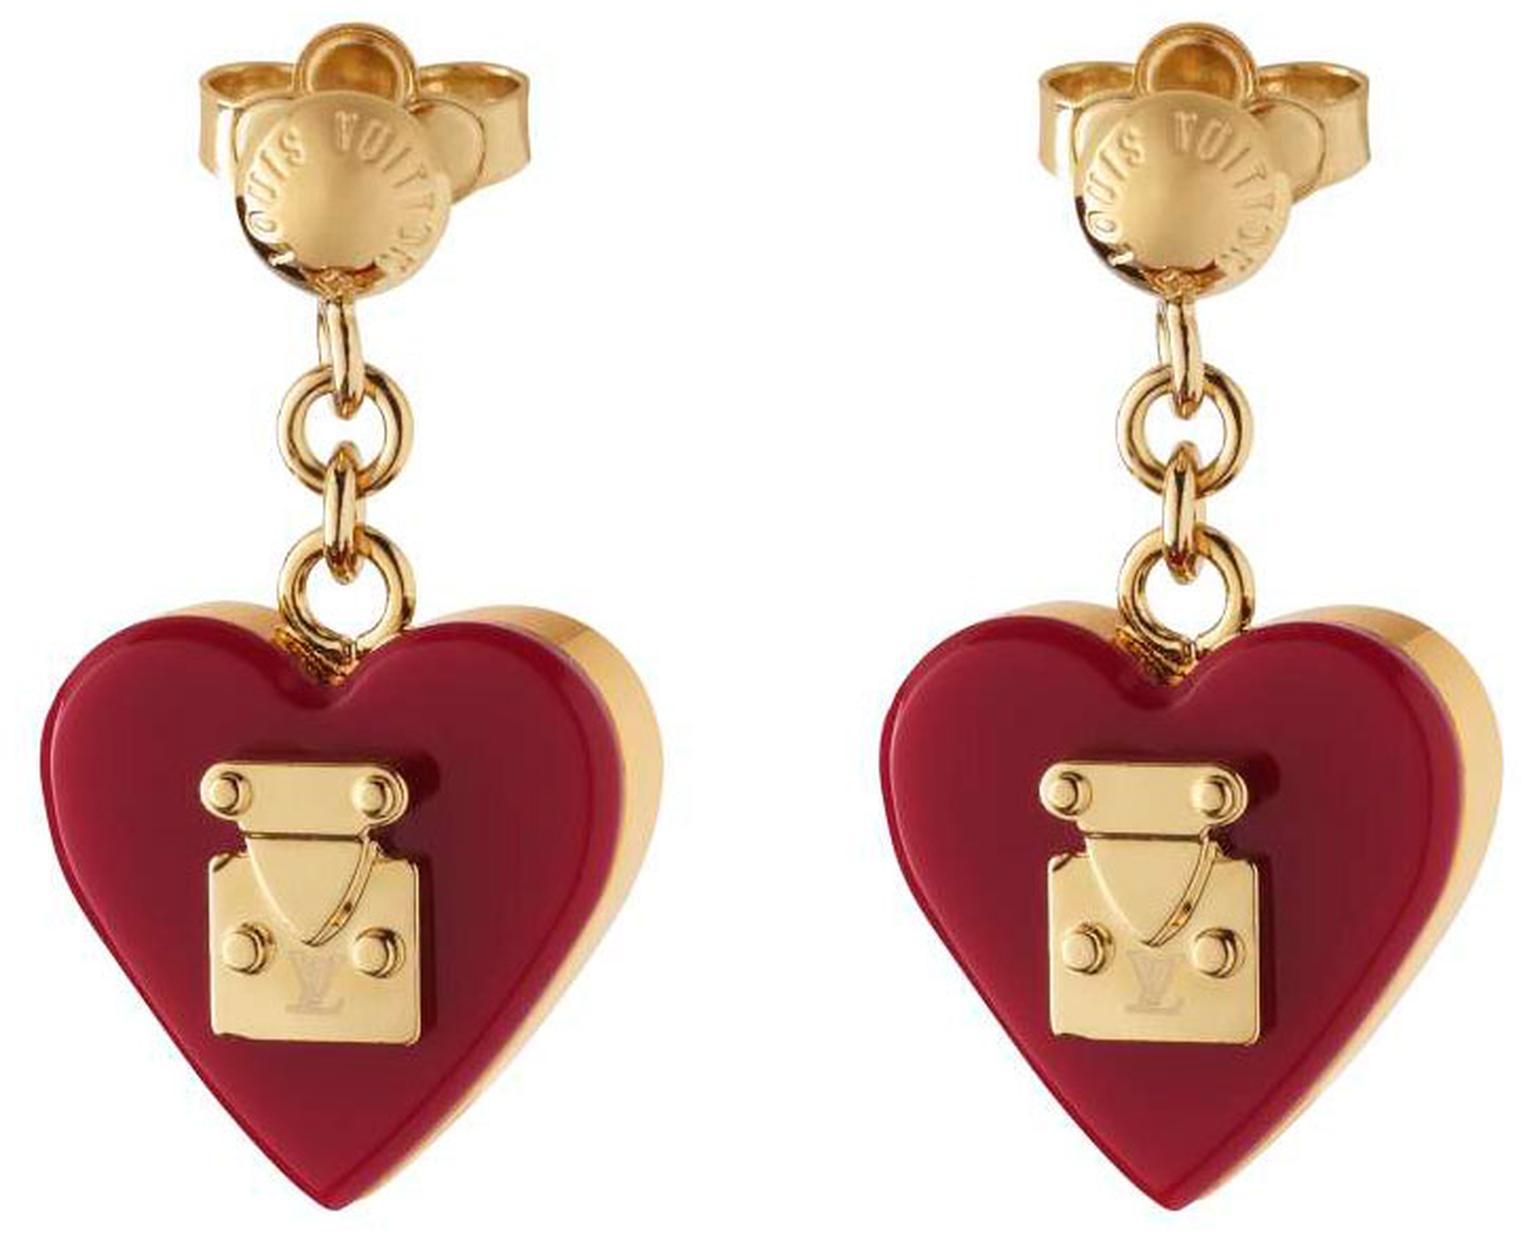 Valentines - Vuitton Lock Me earrings. priced at £270